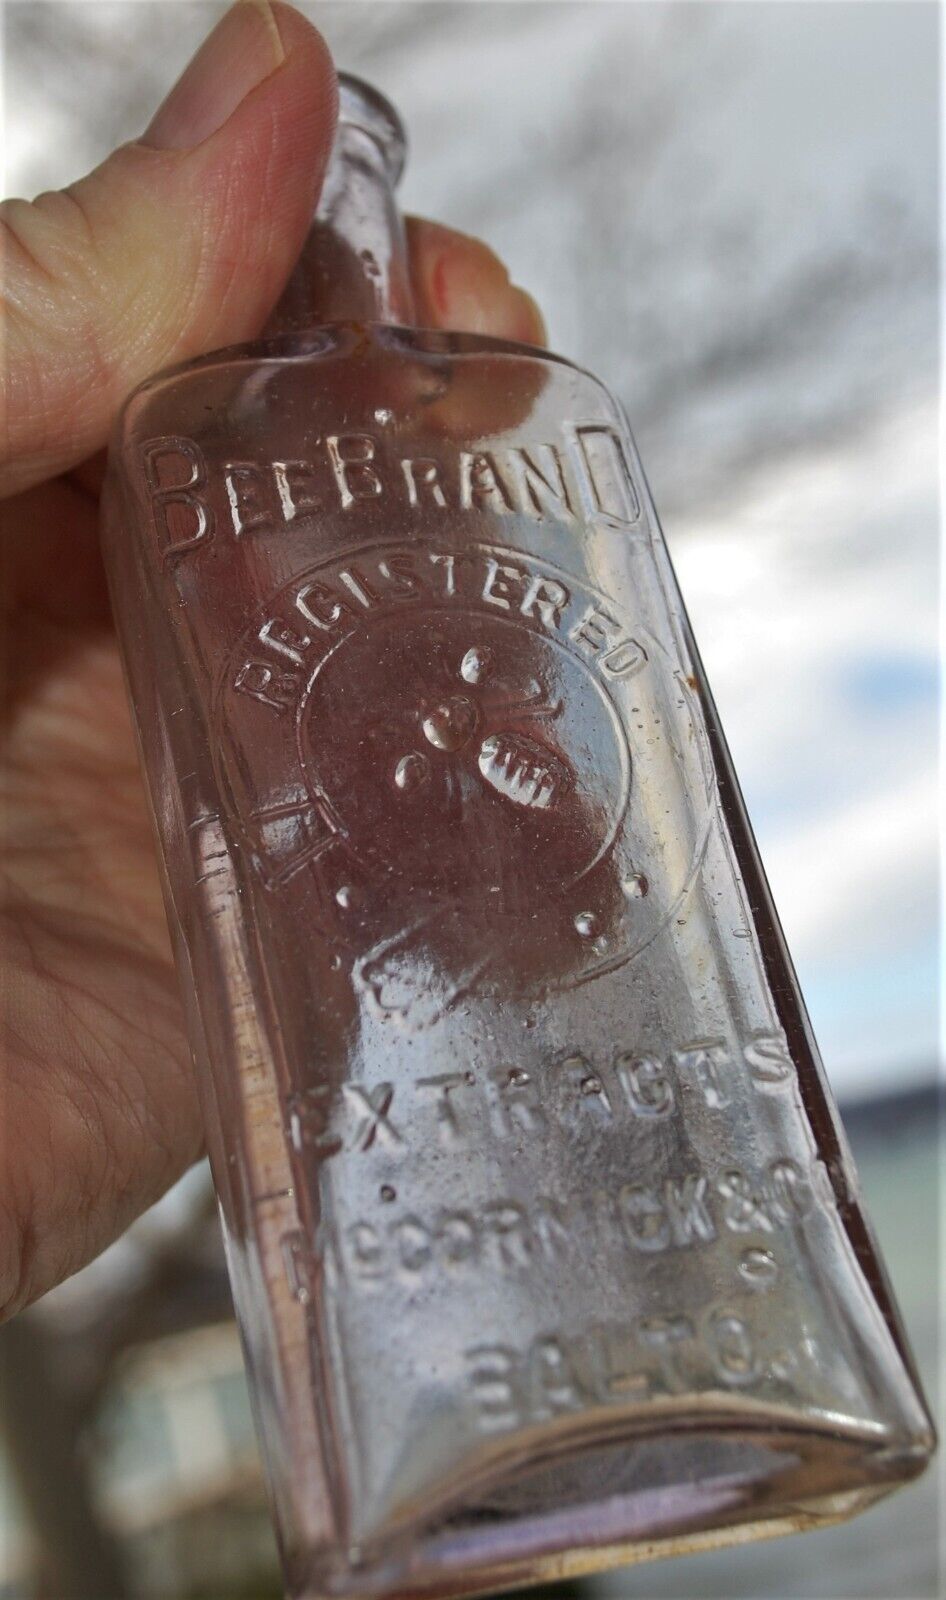 BEE BRAND EXTRACTS rare 1890s McCormick & Co bottle with logo